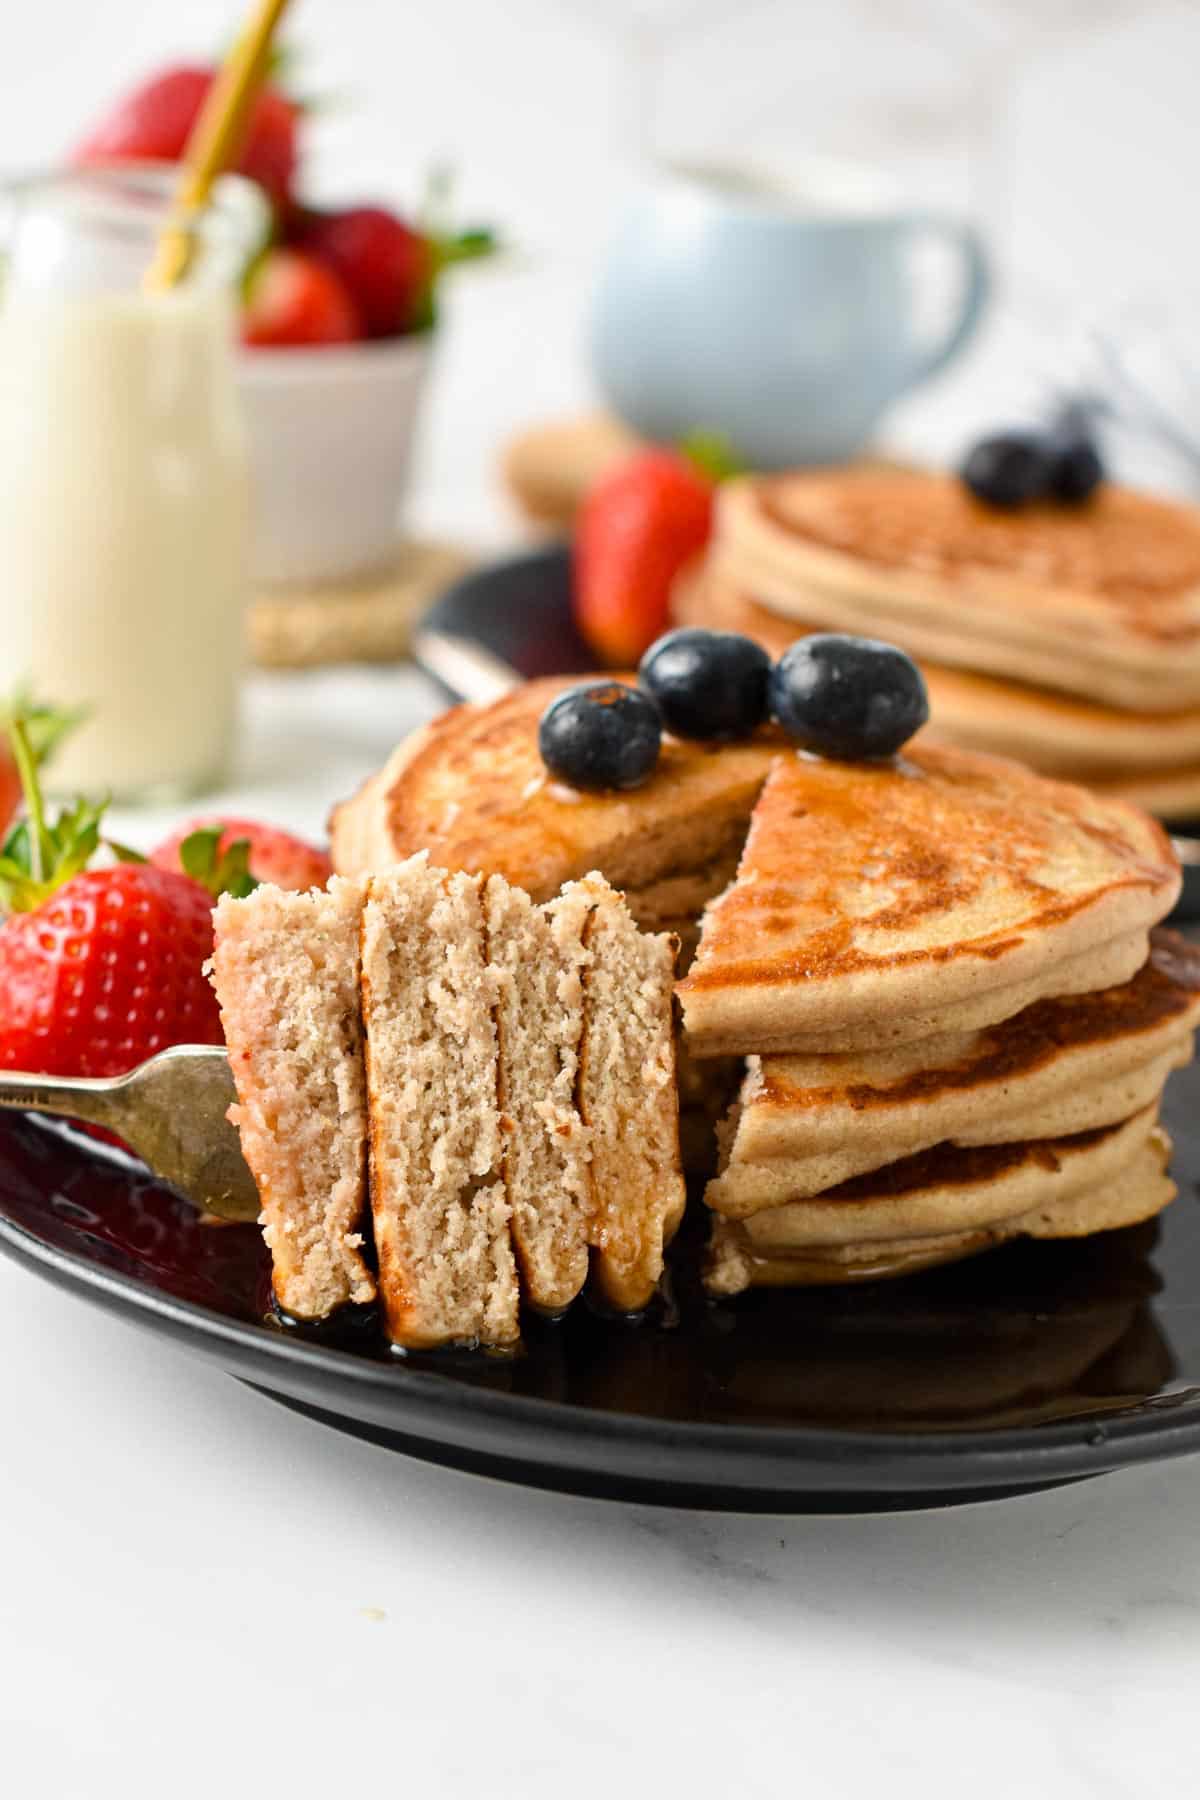 A stack of vegan buckwheat pancakes sliced with a fork holding some pancakes and showing the fluffy pancake texture.